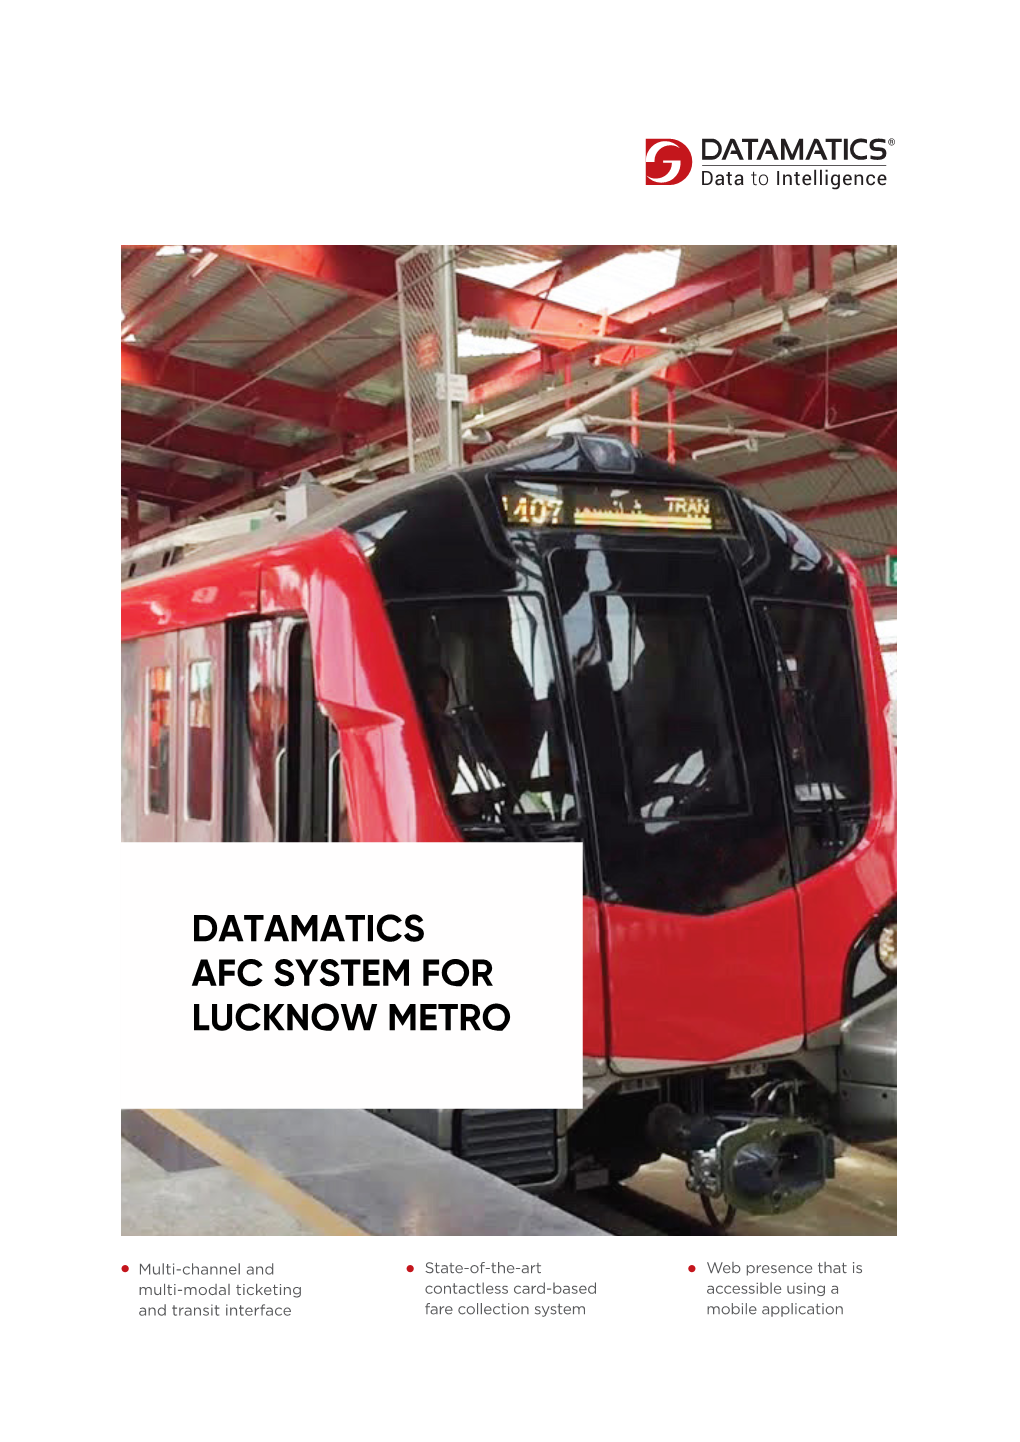 Datamatics Afc System for Lucknow Metro